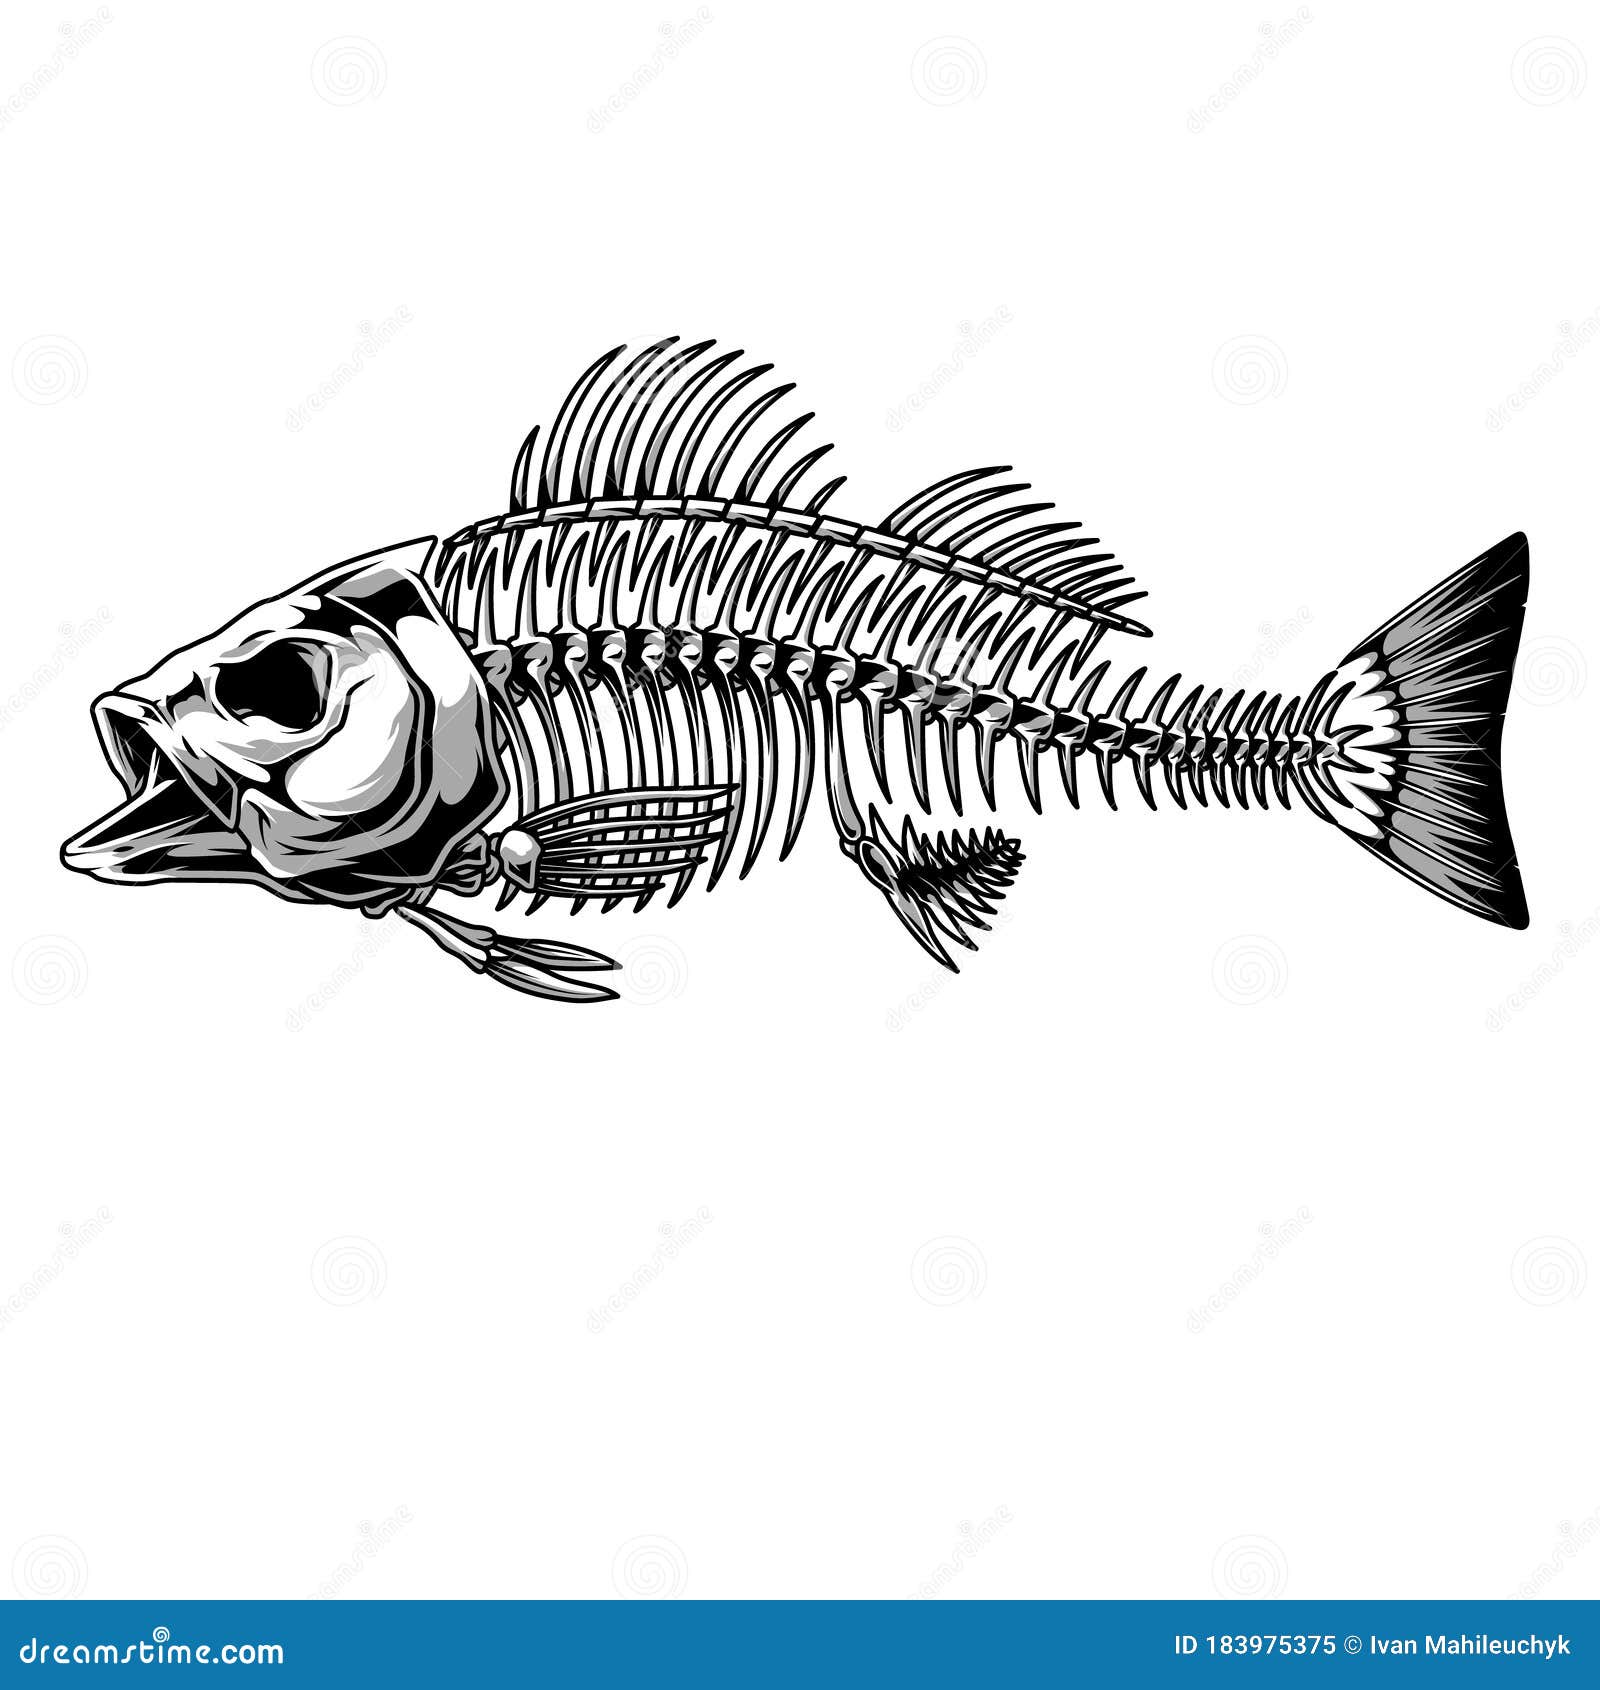 https://thumbs.dreamstime.com/z/bass-fish-skeleton-monochrome-concept-vintage-style-isolated-vector-illustration-bass-fish-skeleton-monochrome-concept-183975375.jpg